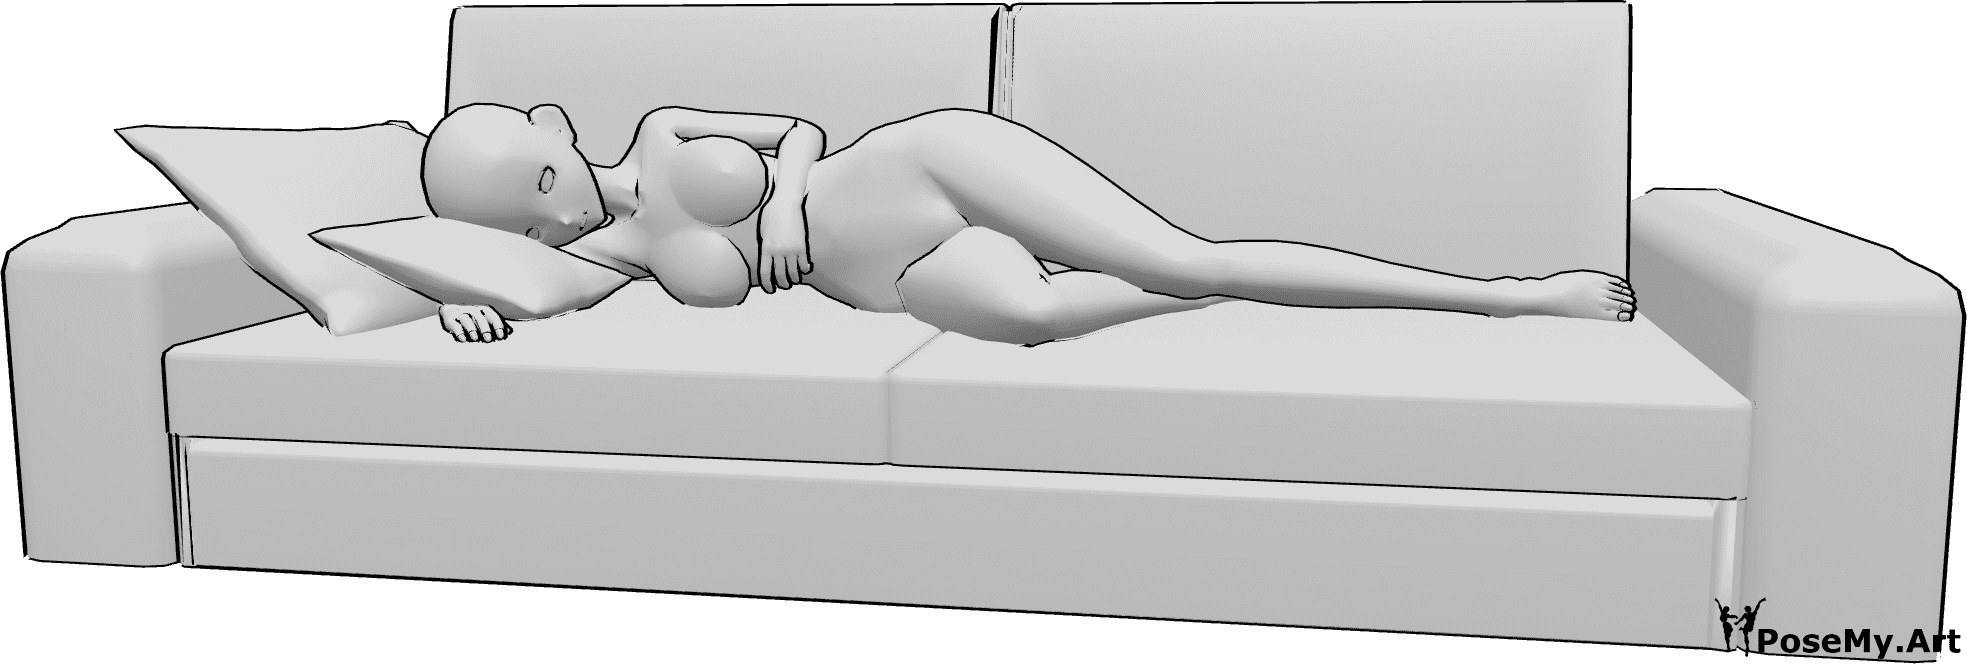 Pose Reference- Anime female lying pose - Anime female is lying on her right side on the couch with pillows and sleeping